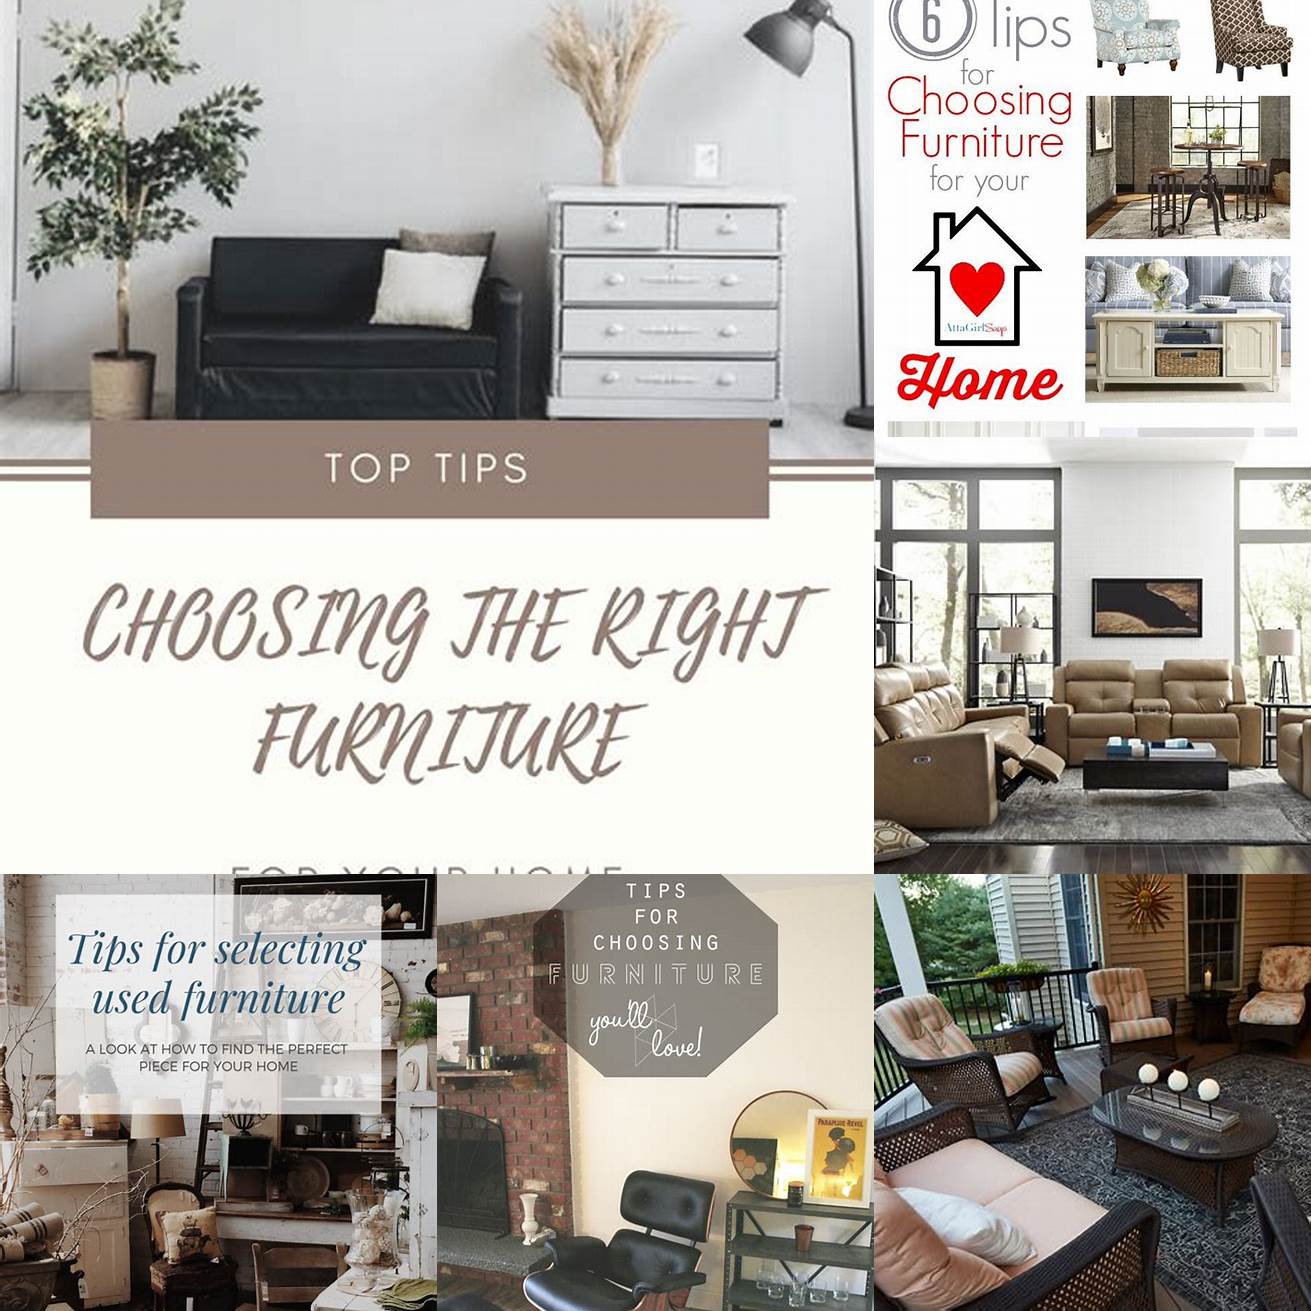 Tips for Selecting Furniture